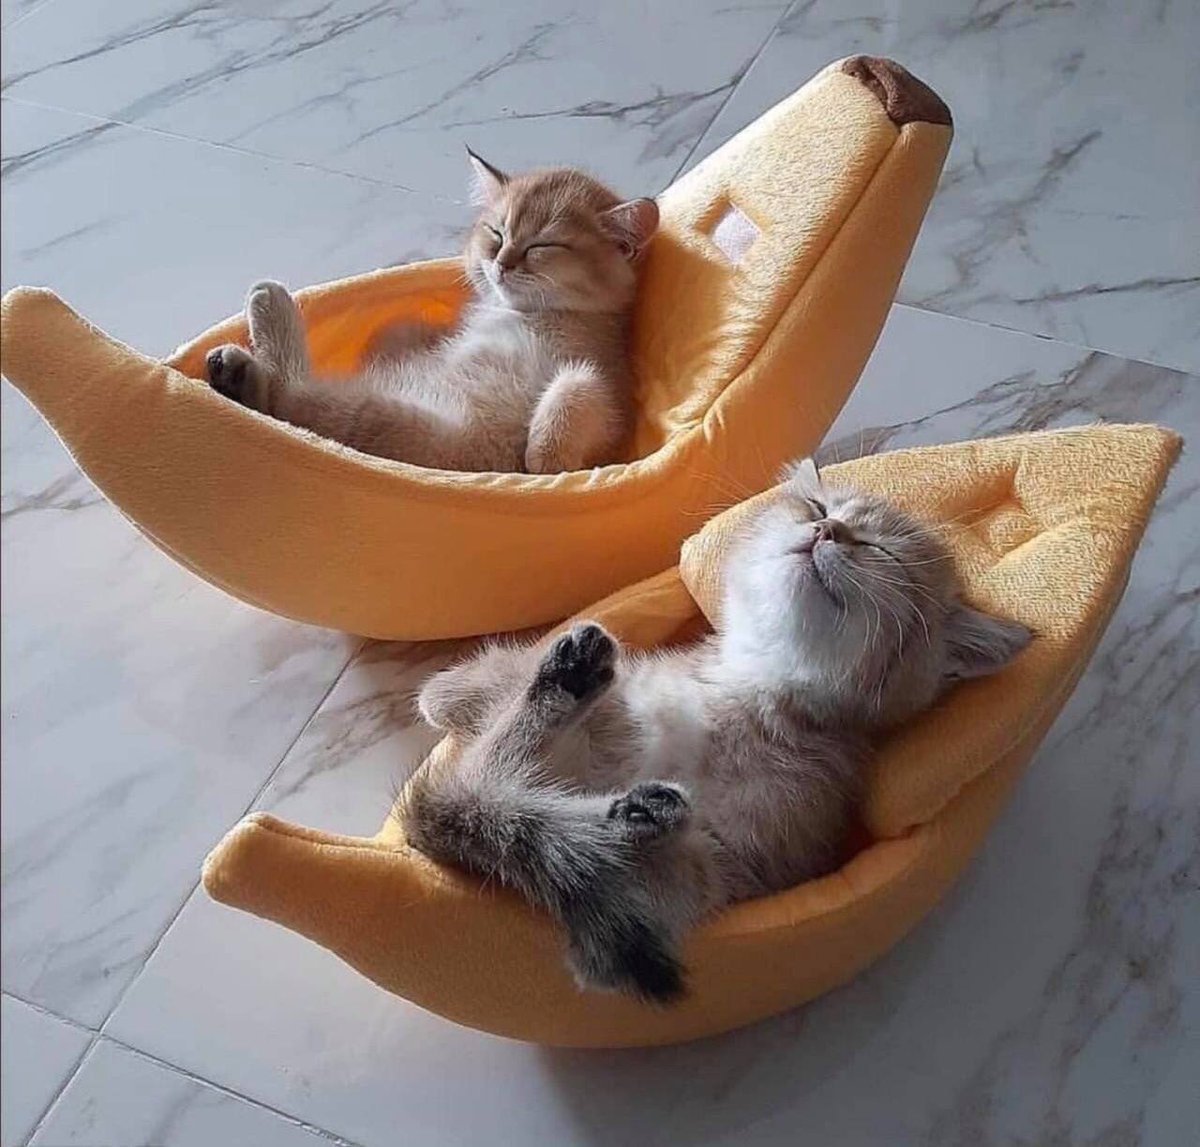 When you and your mate go bananas over bananas, you find there's nothing bananas can't do. 😻🥴😻 #NationalBananaDay #Kittens @ThePhilosopurr @GeneralCattis @HarryCatPurrs @RealCatFanatic9 @LuminousNumino1 @TERRYW_UK @PeterRABBIT67 @briano29 @eliznoelle @EringoB02429272 @lymeist